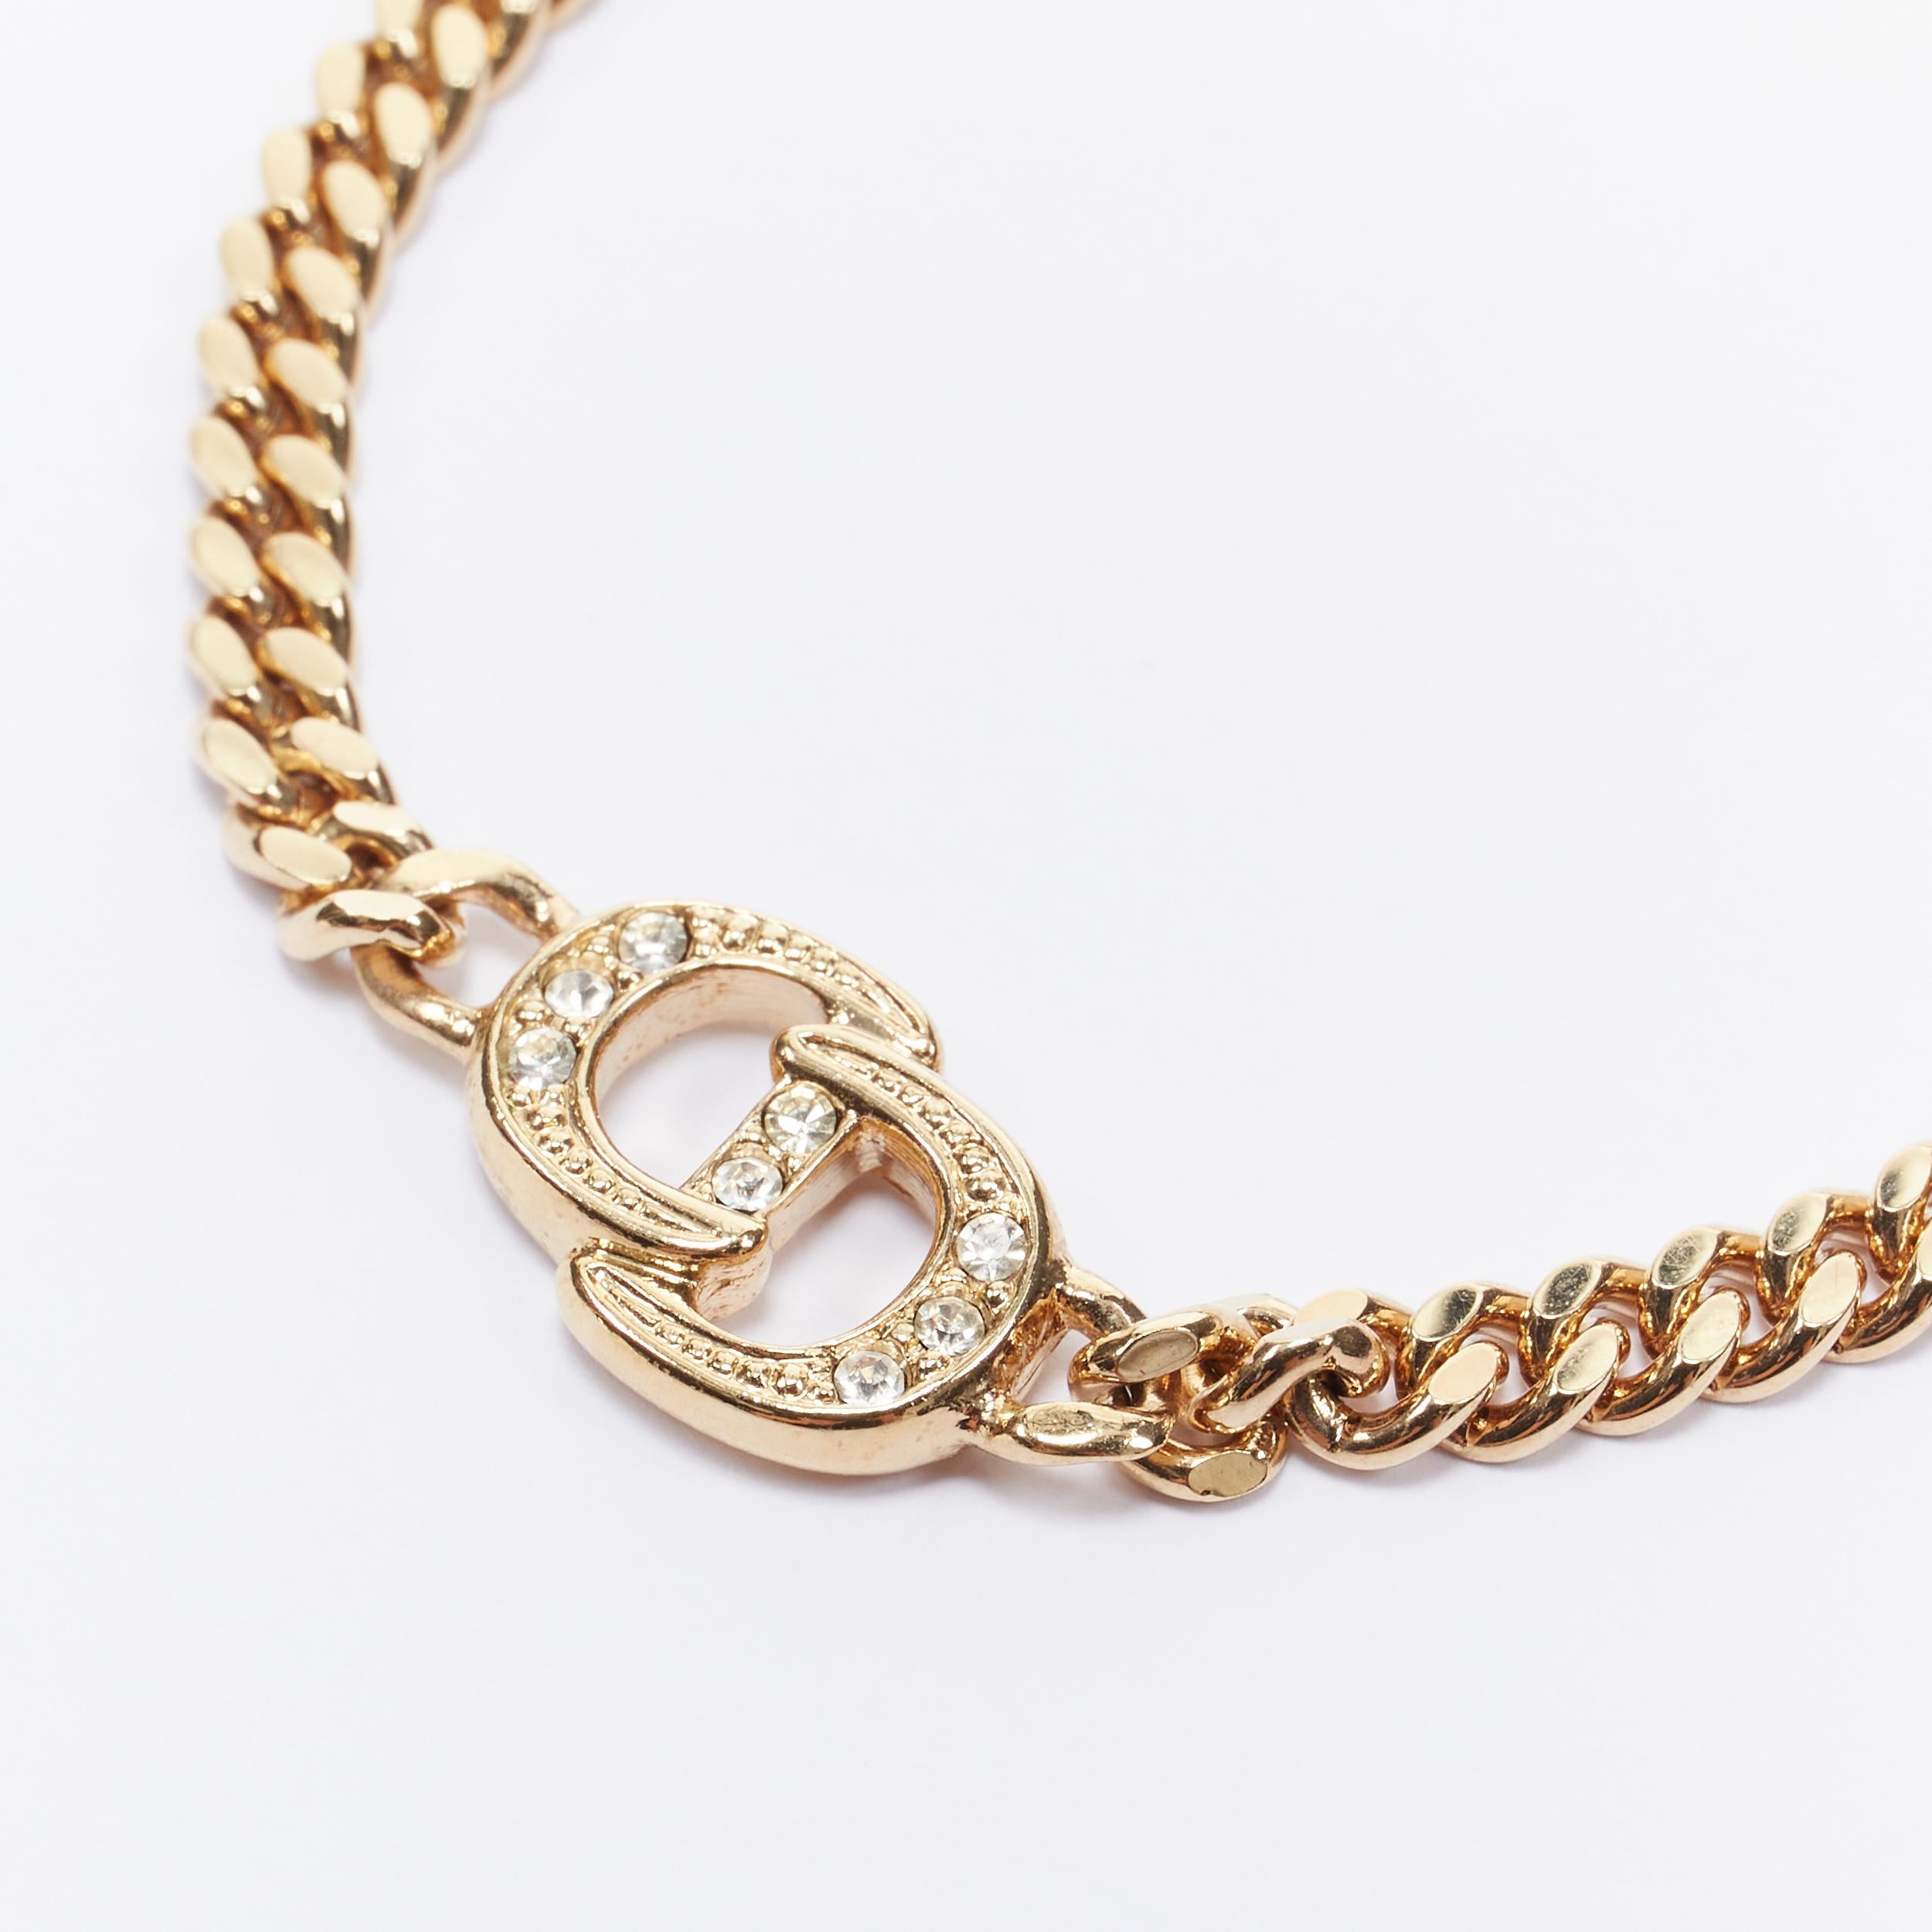 vintage CHRISTIAN DIOR CD logo pave crystal gold chain bracelet 
Reference: TGAS/B00707 
Brand: Christian Dior 
Designer: John Galliano 
Material: Metal 
Color: Gold 
Pattern: Solid 
Closure: Clasp 
Extra Detail: Crystal pave CD logo. 

CONDITION: